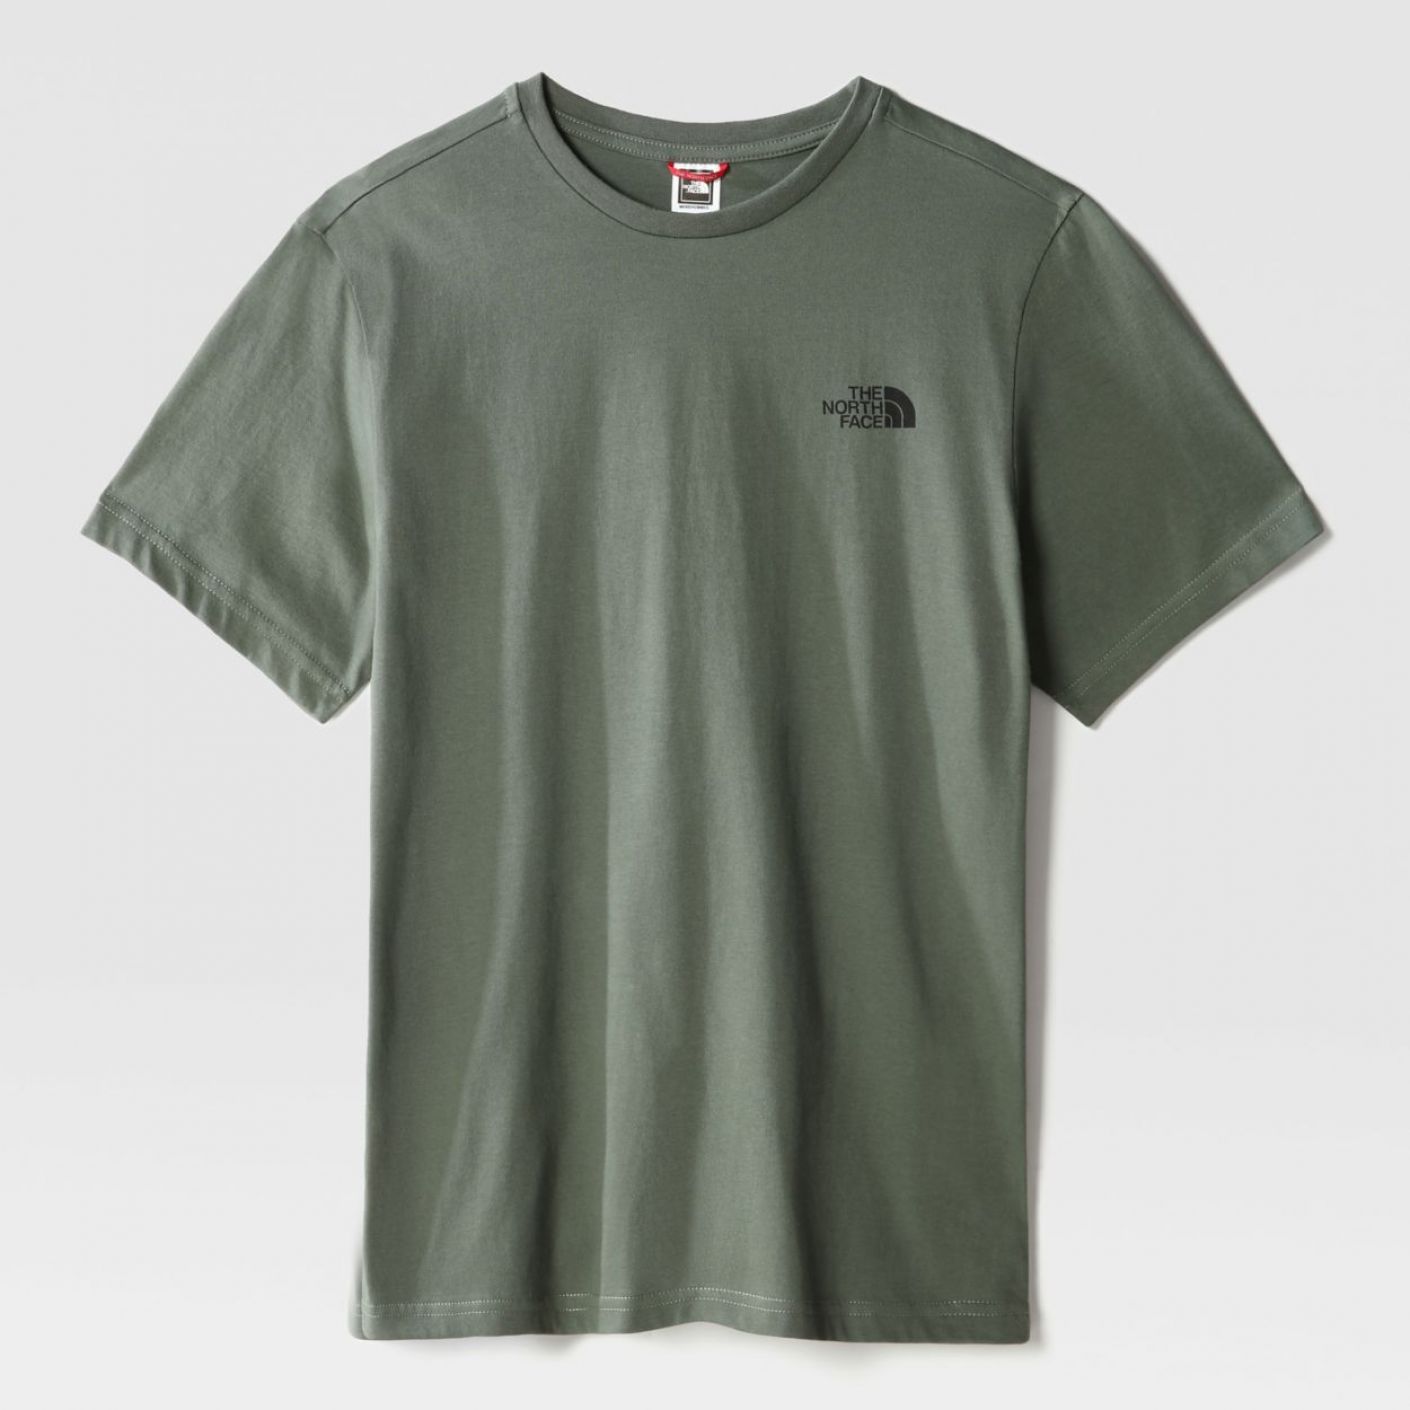 The North Face M s/s simple dome tee eu thyme/tnf black